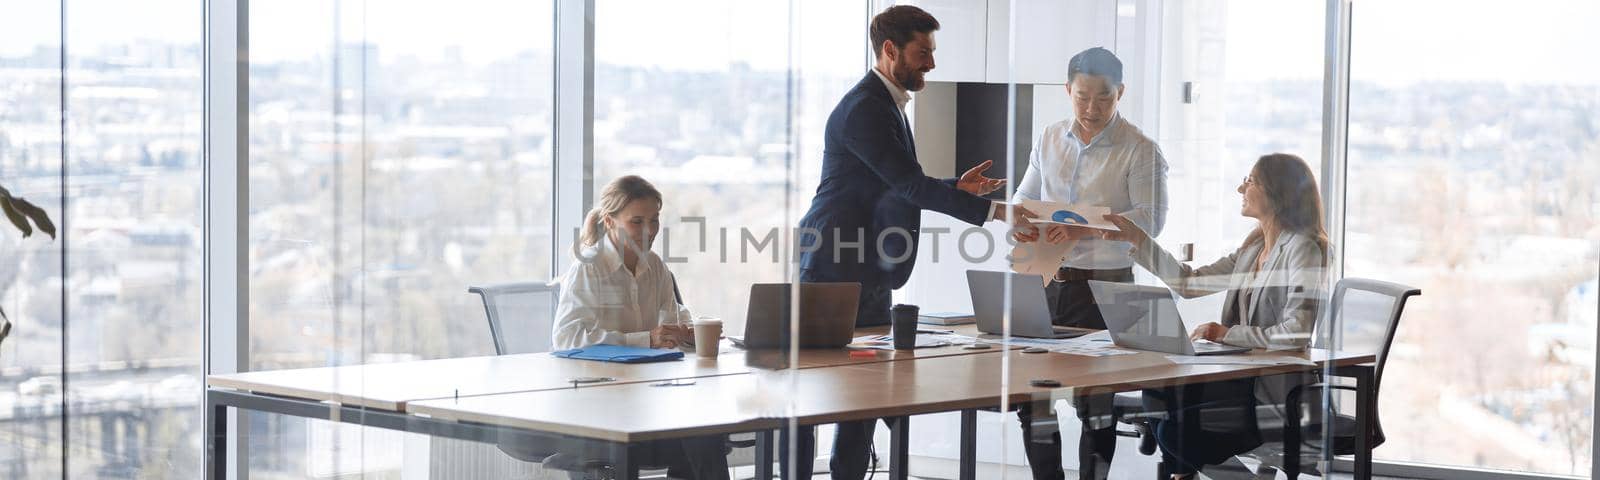 People standing near table, team of young businessmen working and communicating together in office by Yaroslav_astakhov